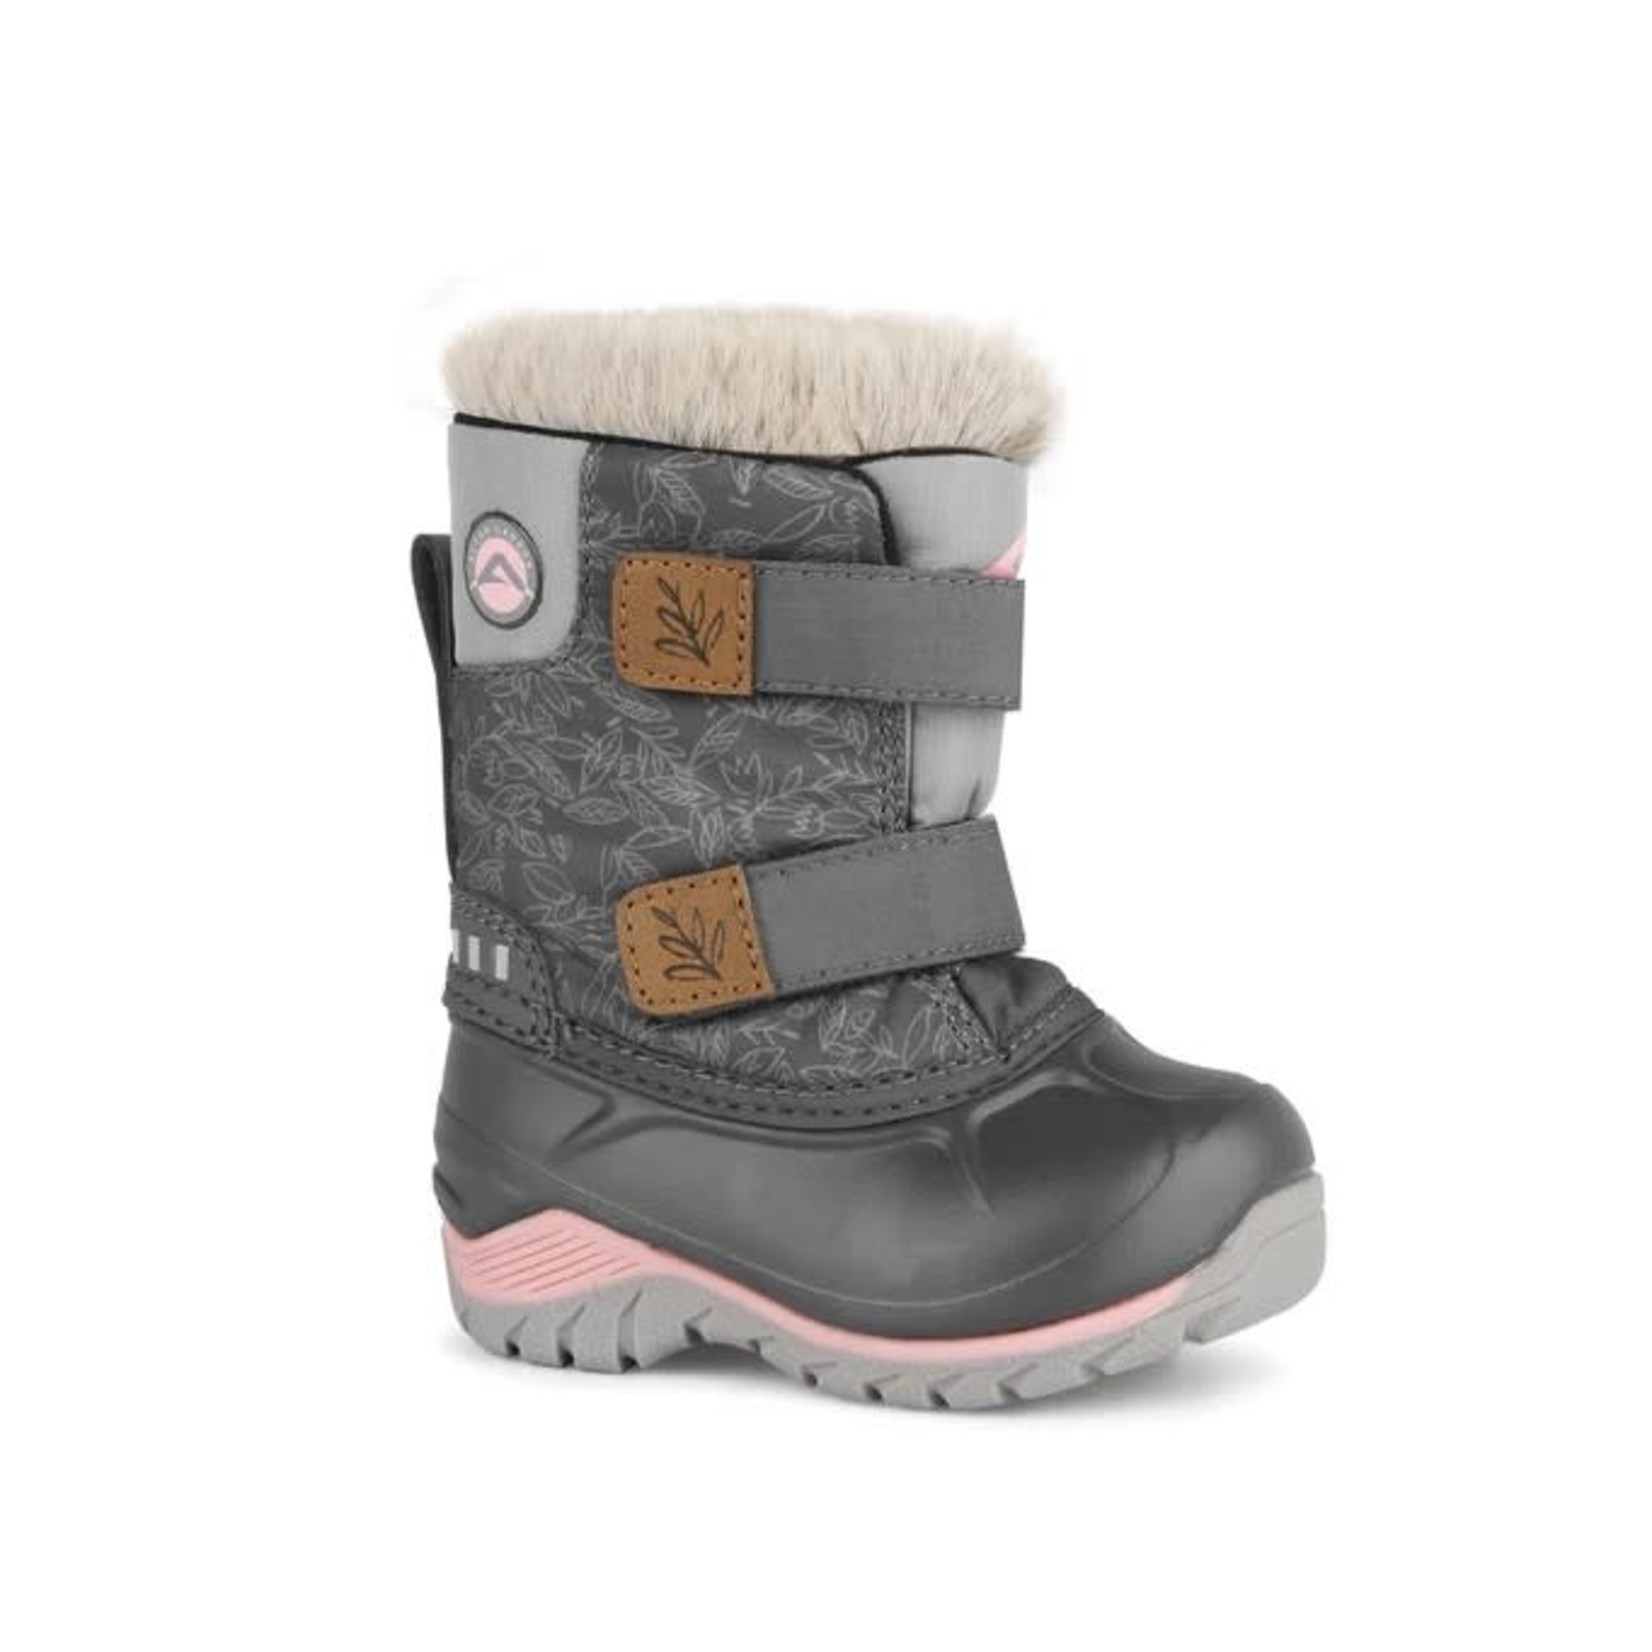 Acton ACTON - Winter boots 'Funky - Grey and pink'